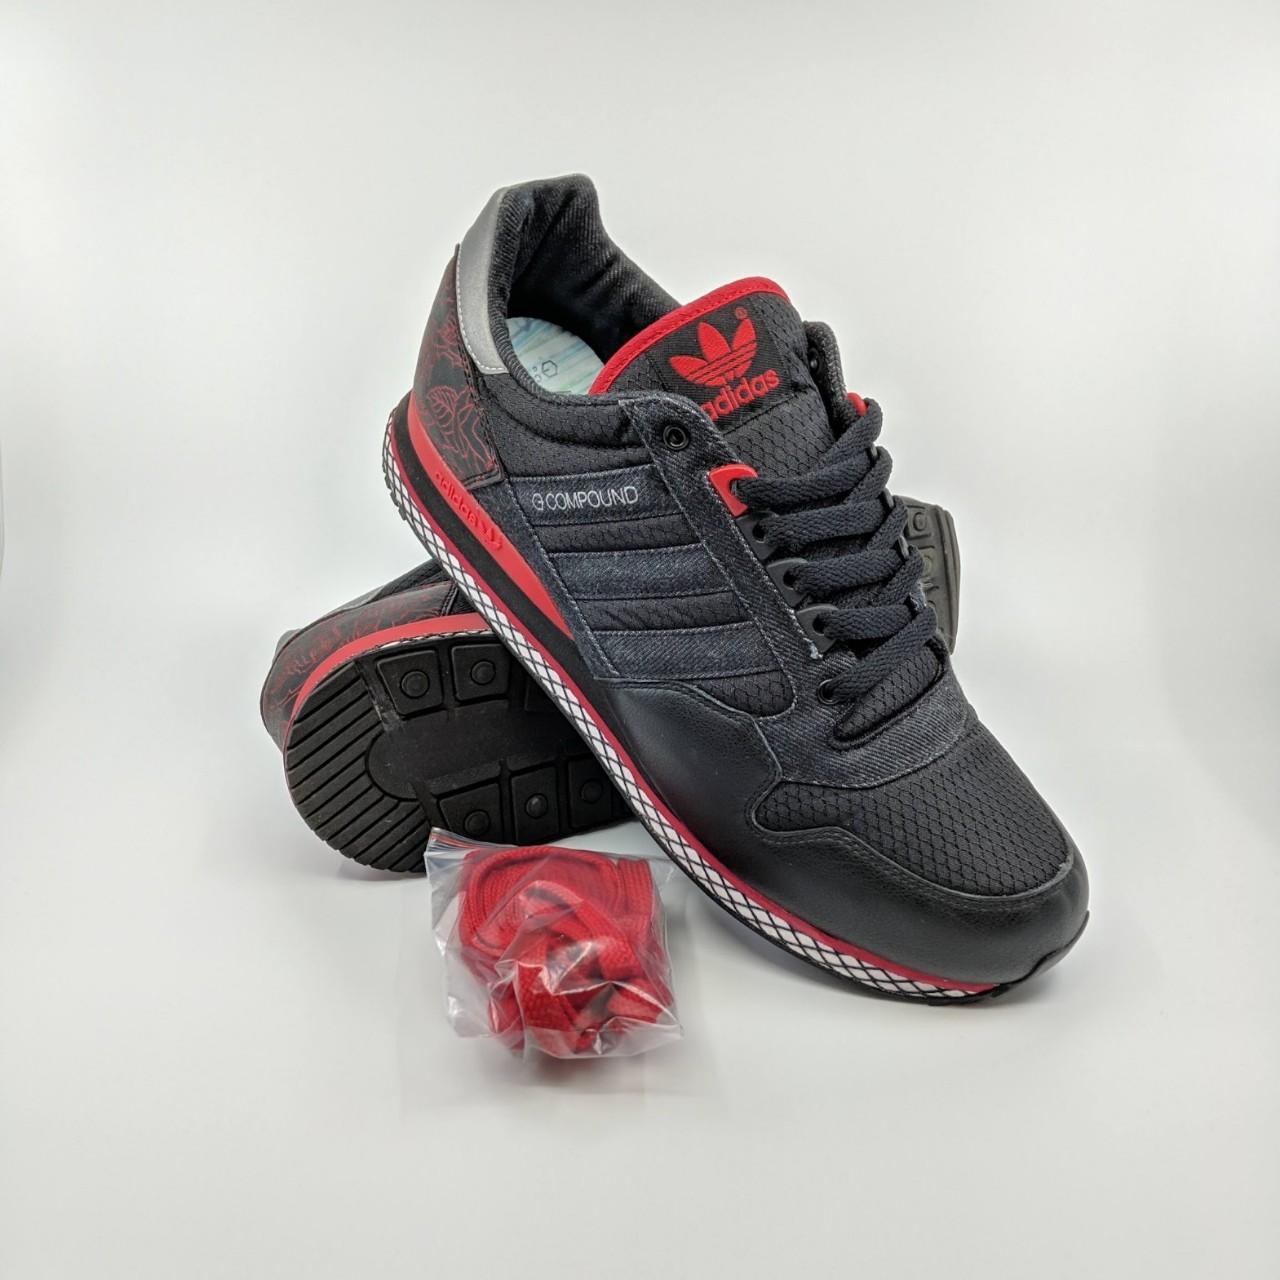 adidas 2008 CONSORTIUM AZX ZX 500 JUST BE COMPOUND